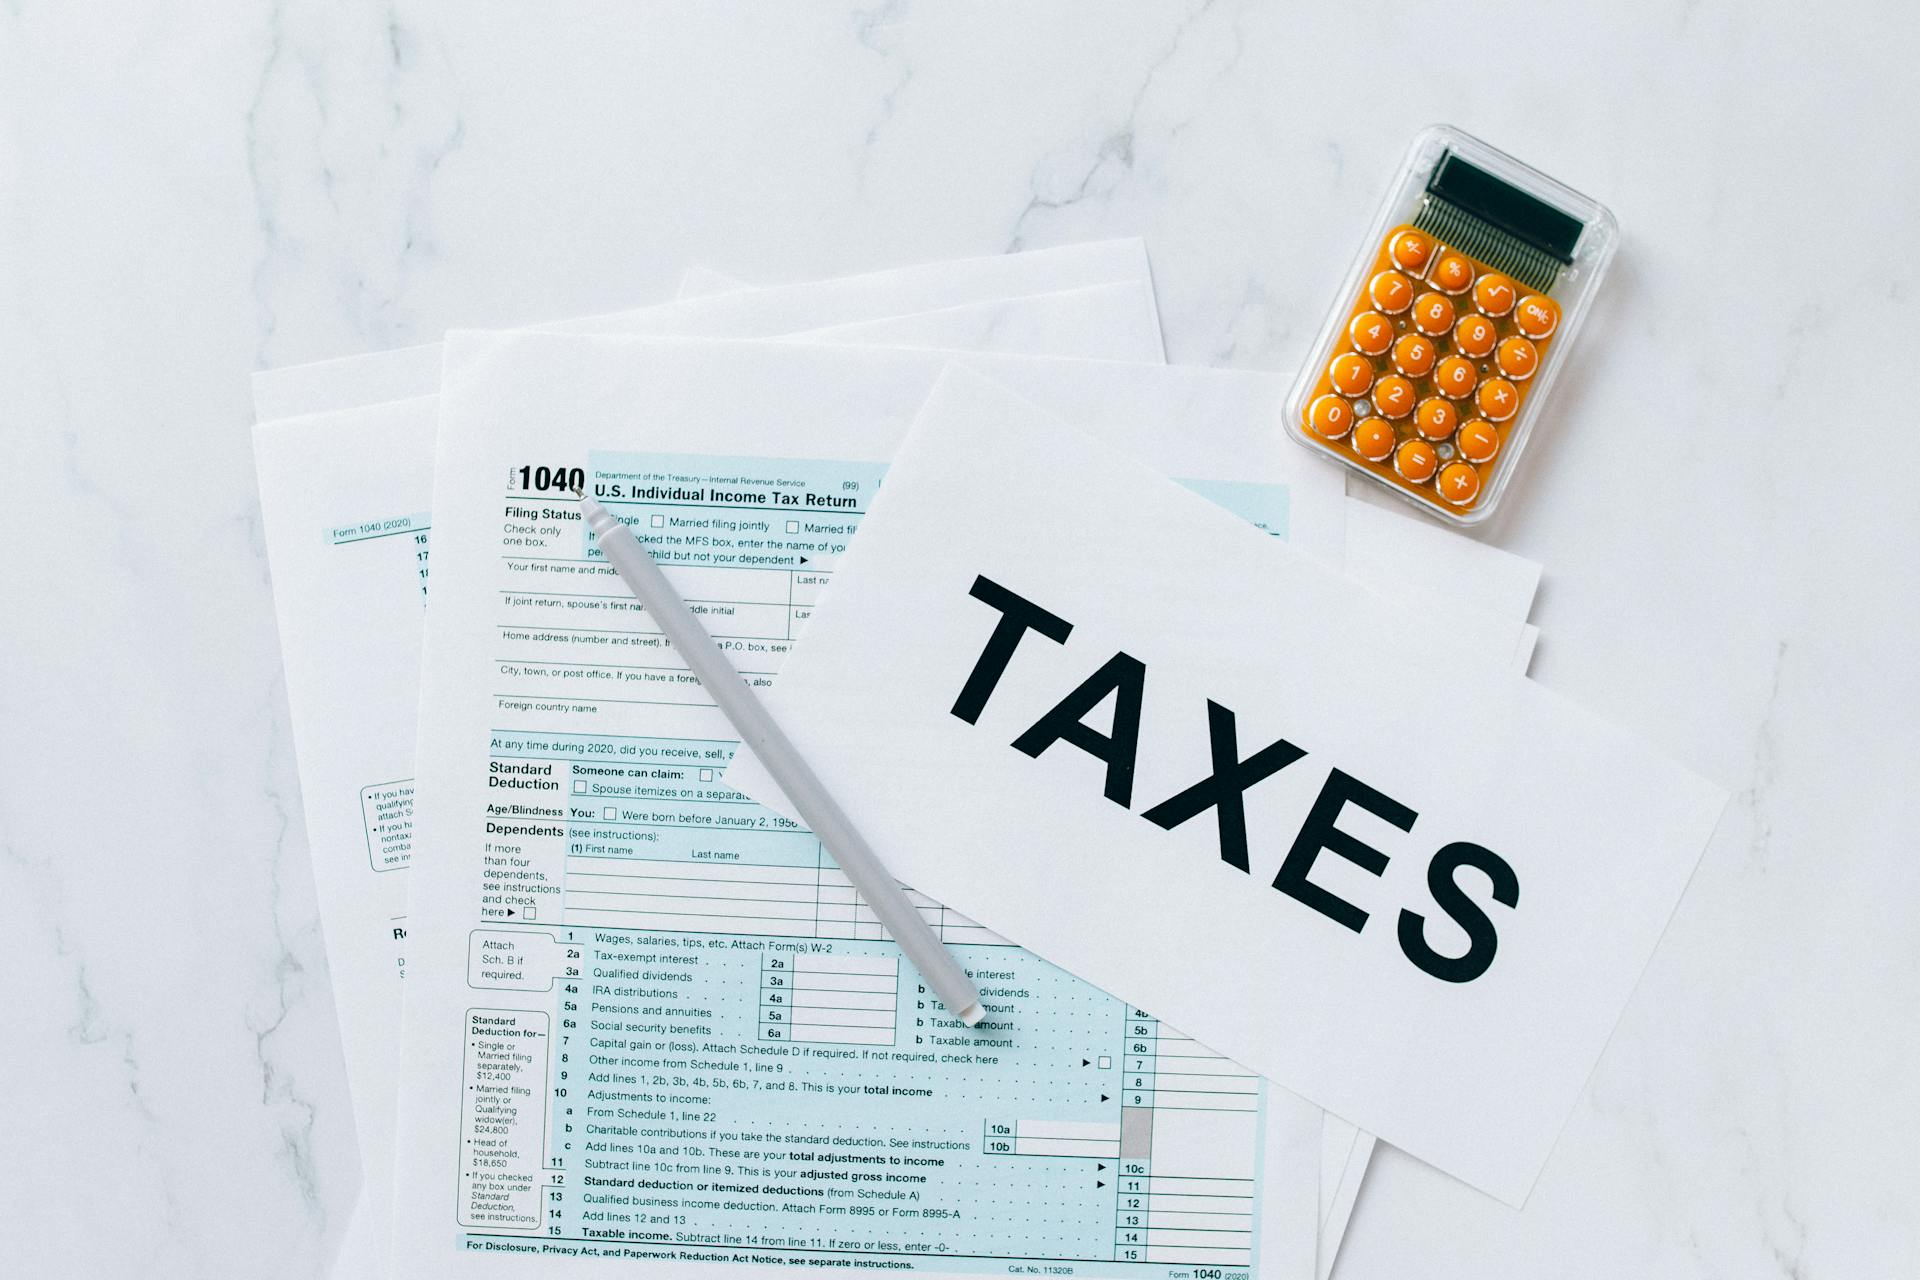 IRS 7200 Tax Form: All About the Form 7200 Advanced Payment